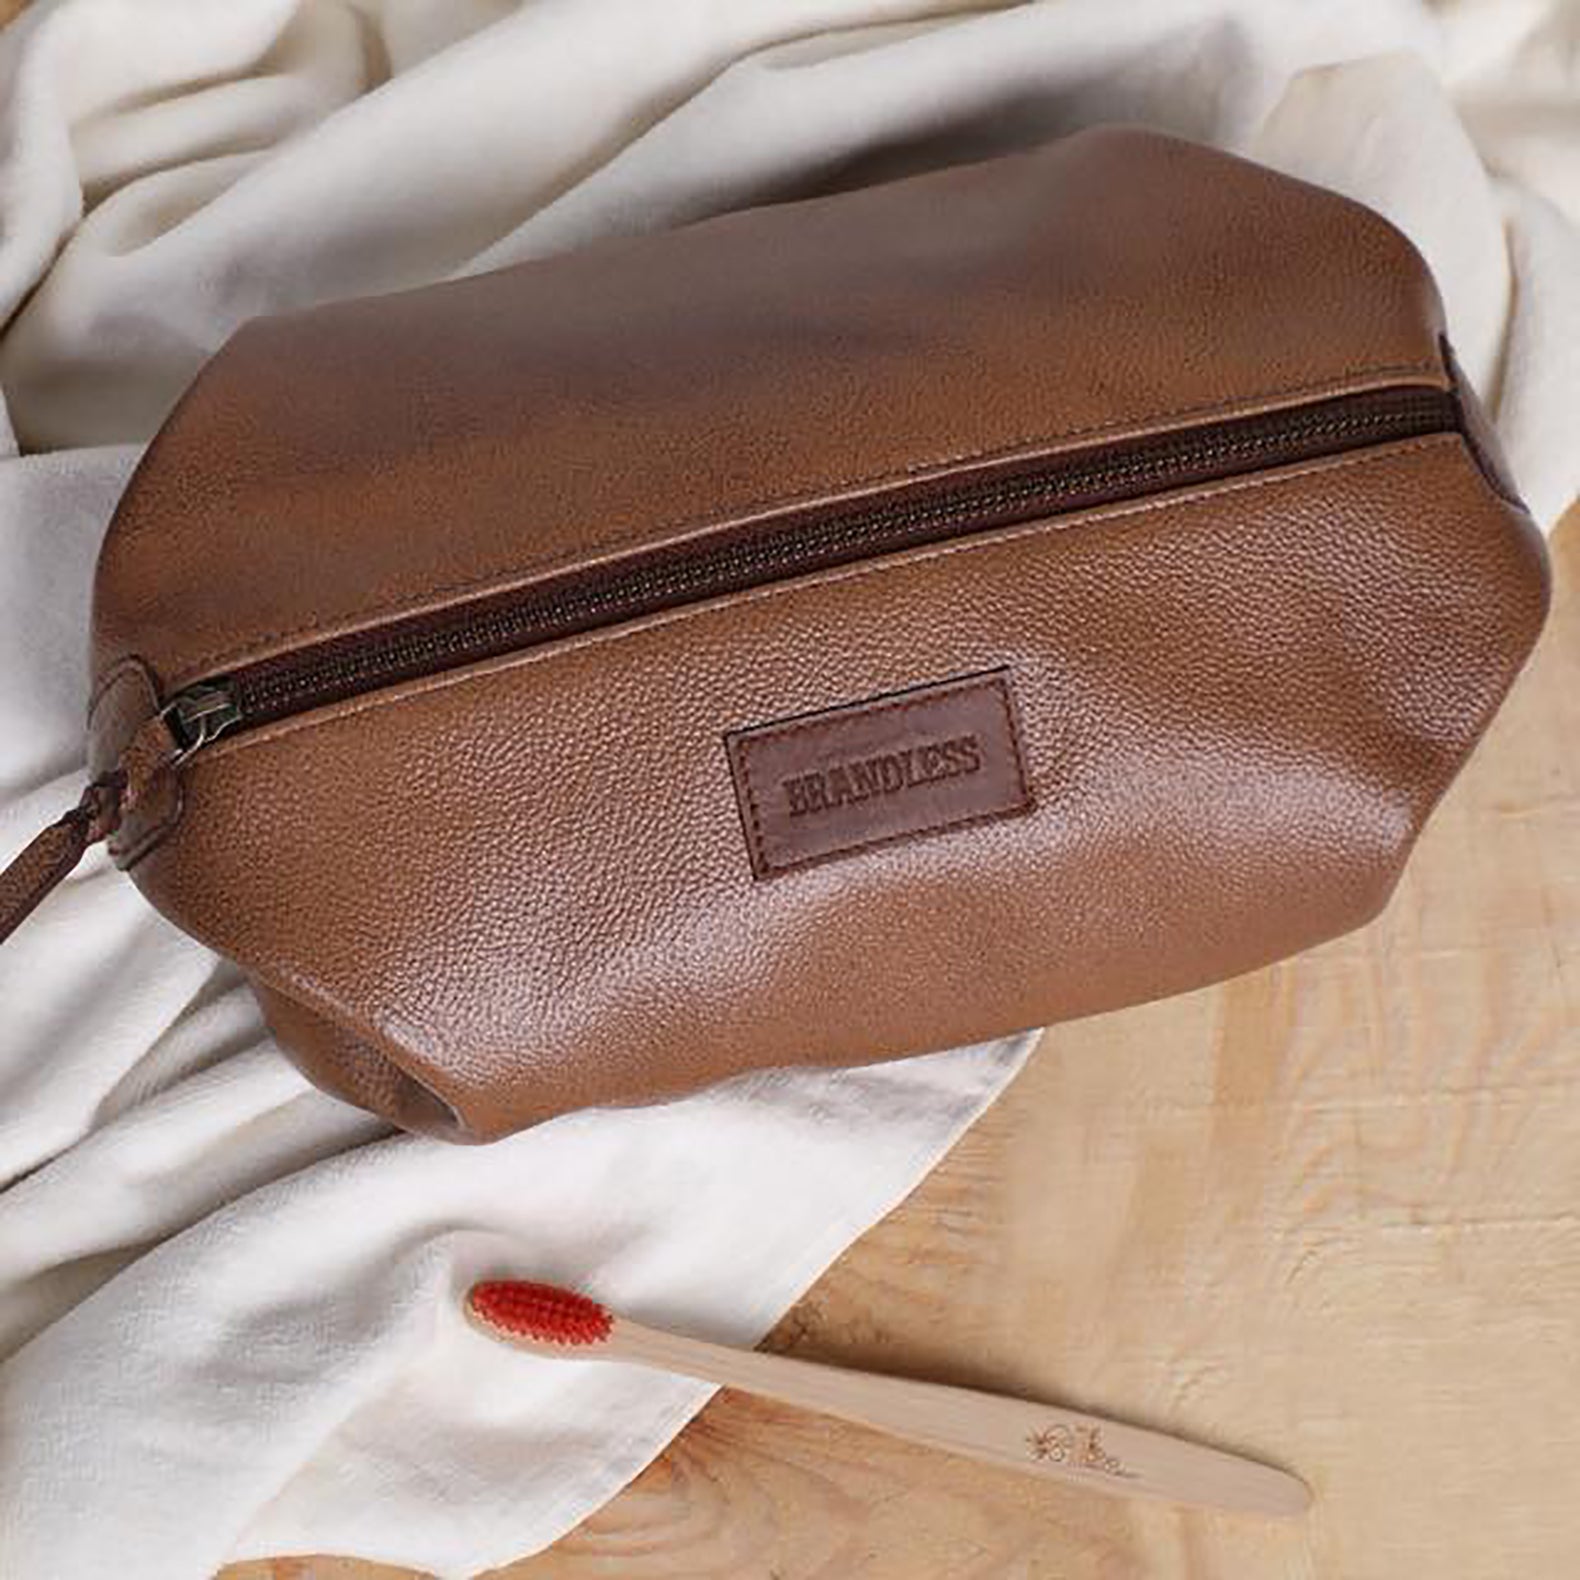 TRAVEL ACCESSORIES LEATHER DOPP KIT TRAVEL KITThe travel Dopp Kit handcrafted in genuine leather is a compact and stylish bag designed for travellers to keep their toiletries and cosmetics organised and easily accessible while on the go.